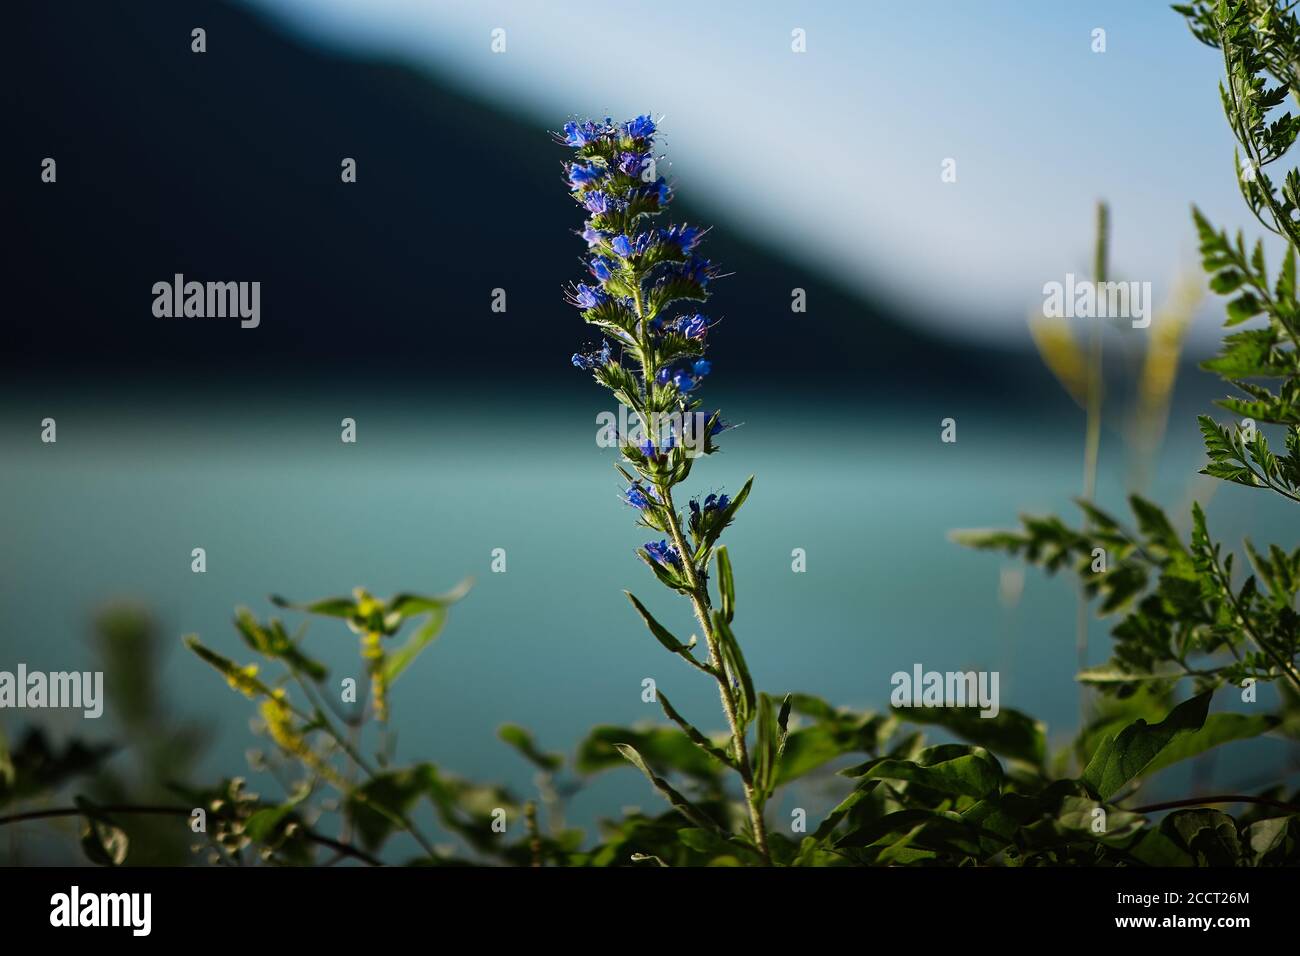 The flowers of the viper's bugloss plant Echium vulgare standing out against the background Stock Photo